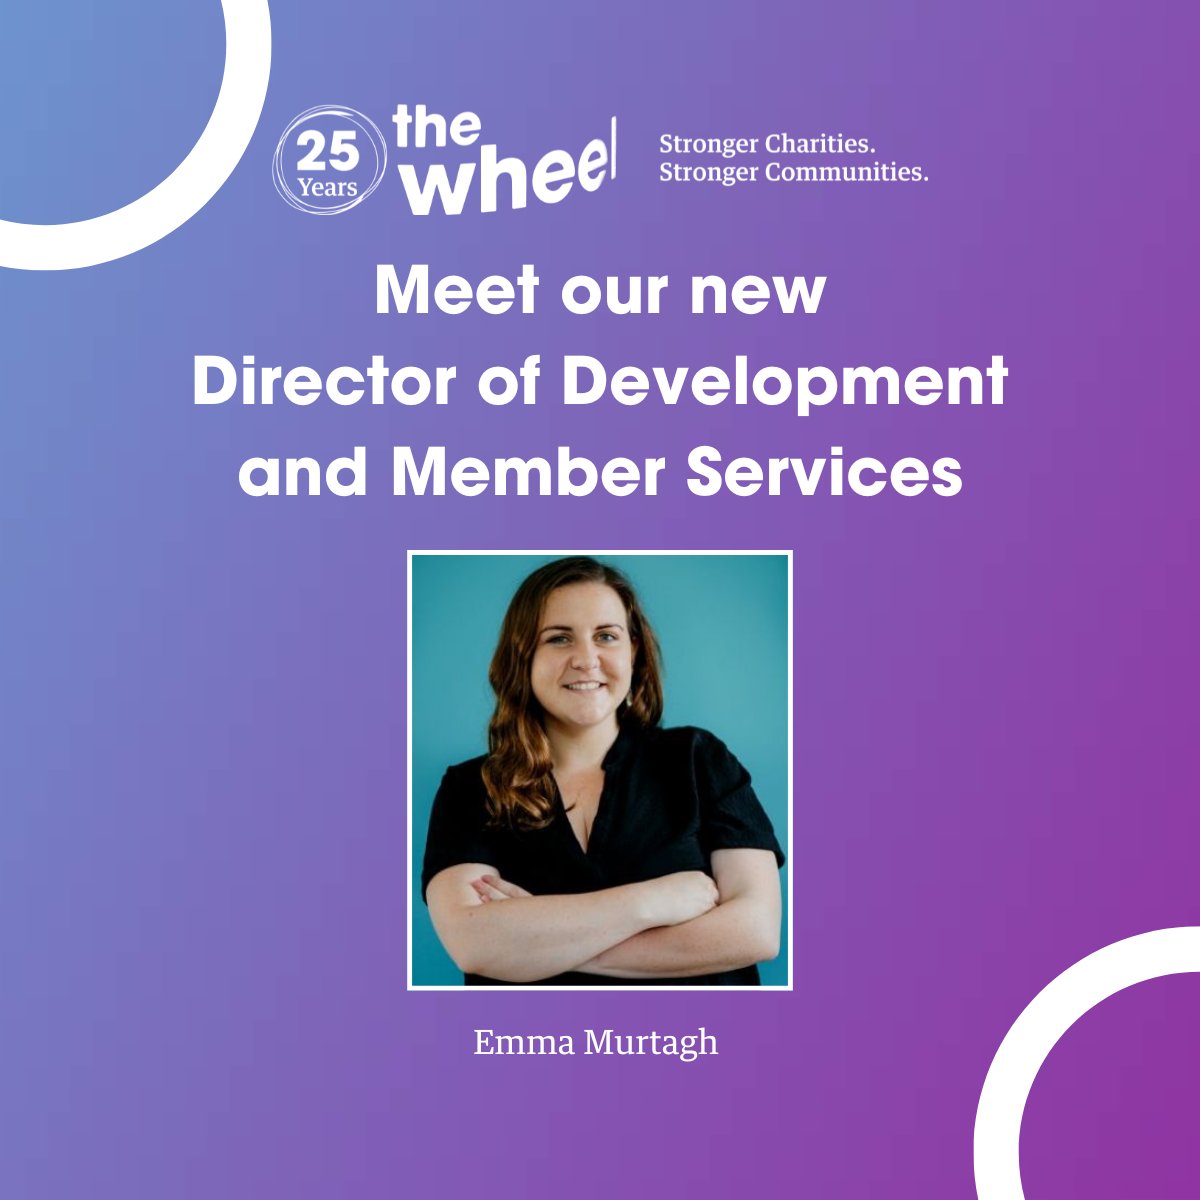 Congratulations to Emma Murtagh who has been appointed as The Wheel's new Director of Development and Member Services.